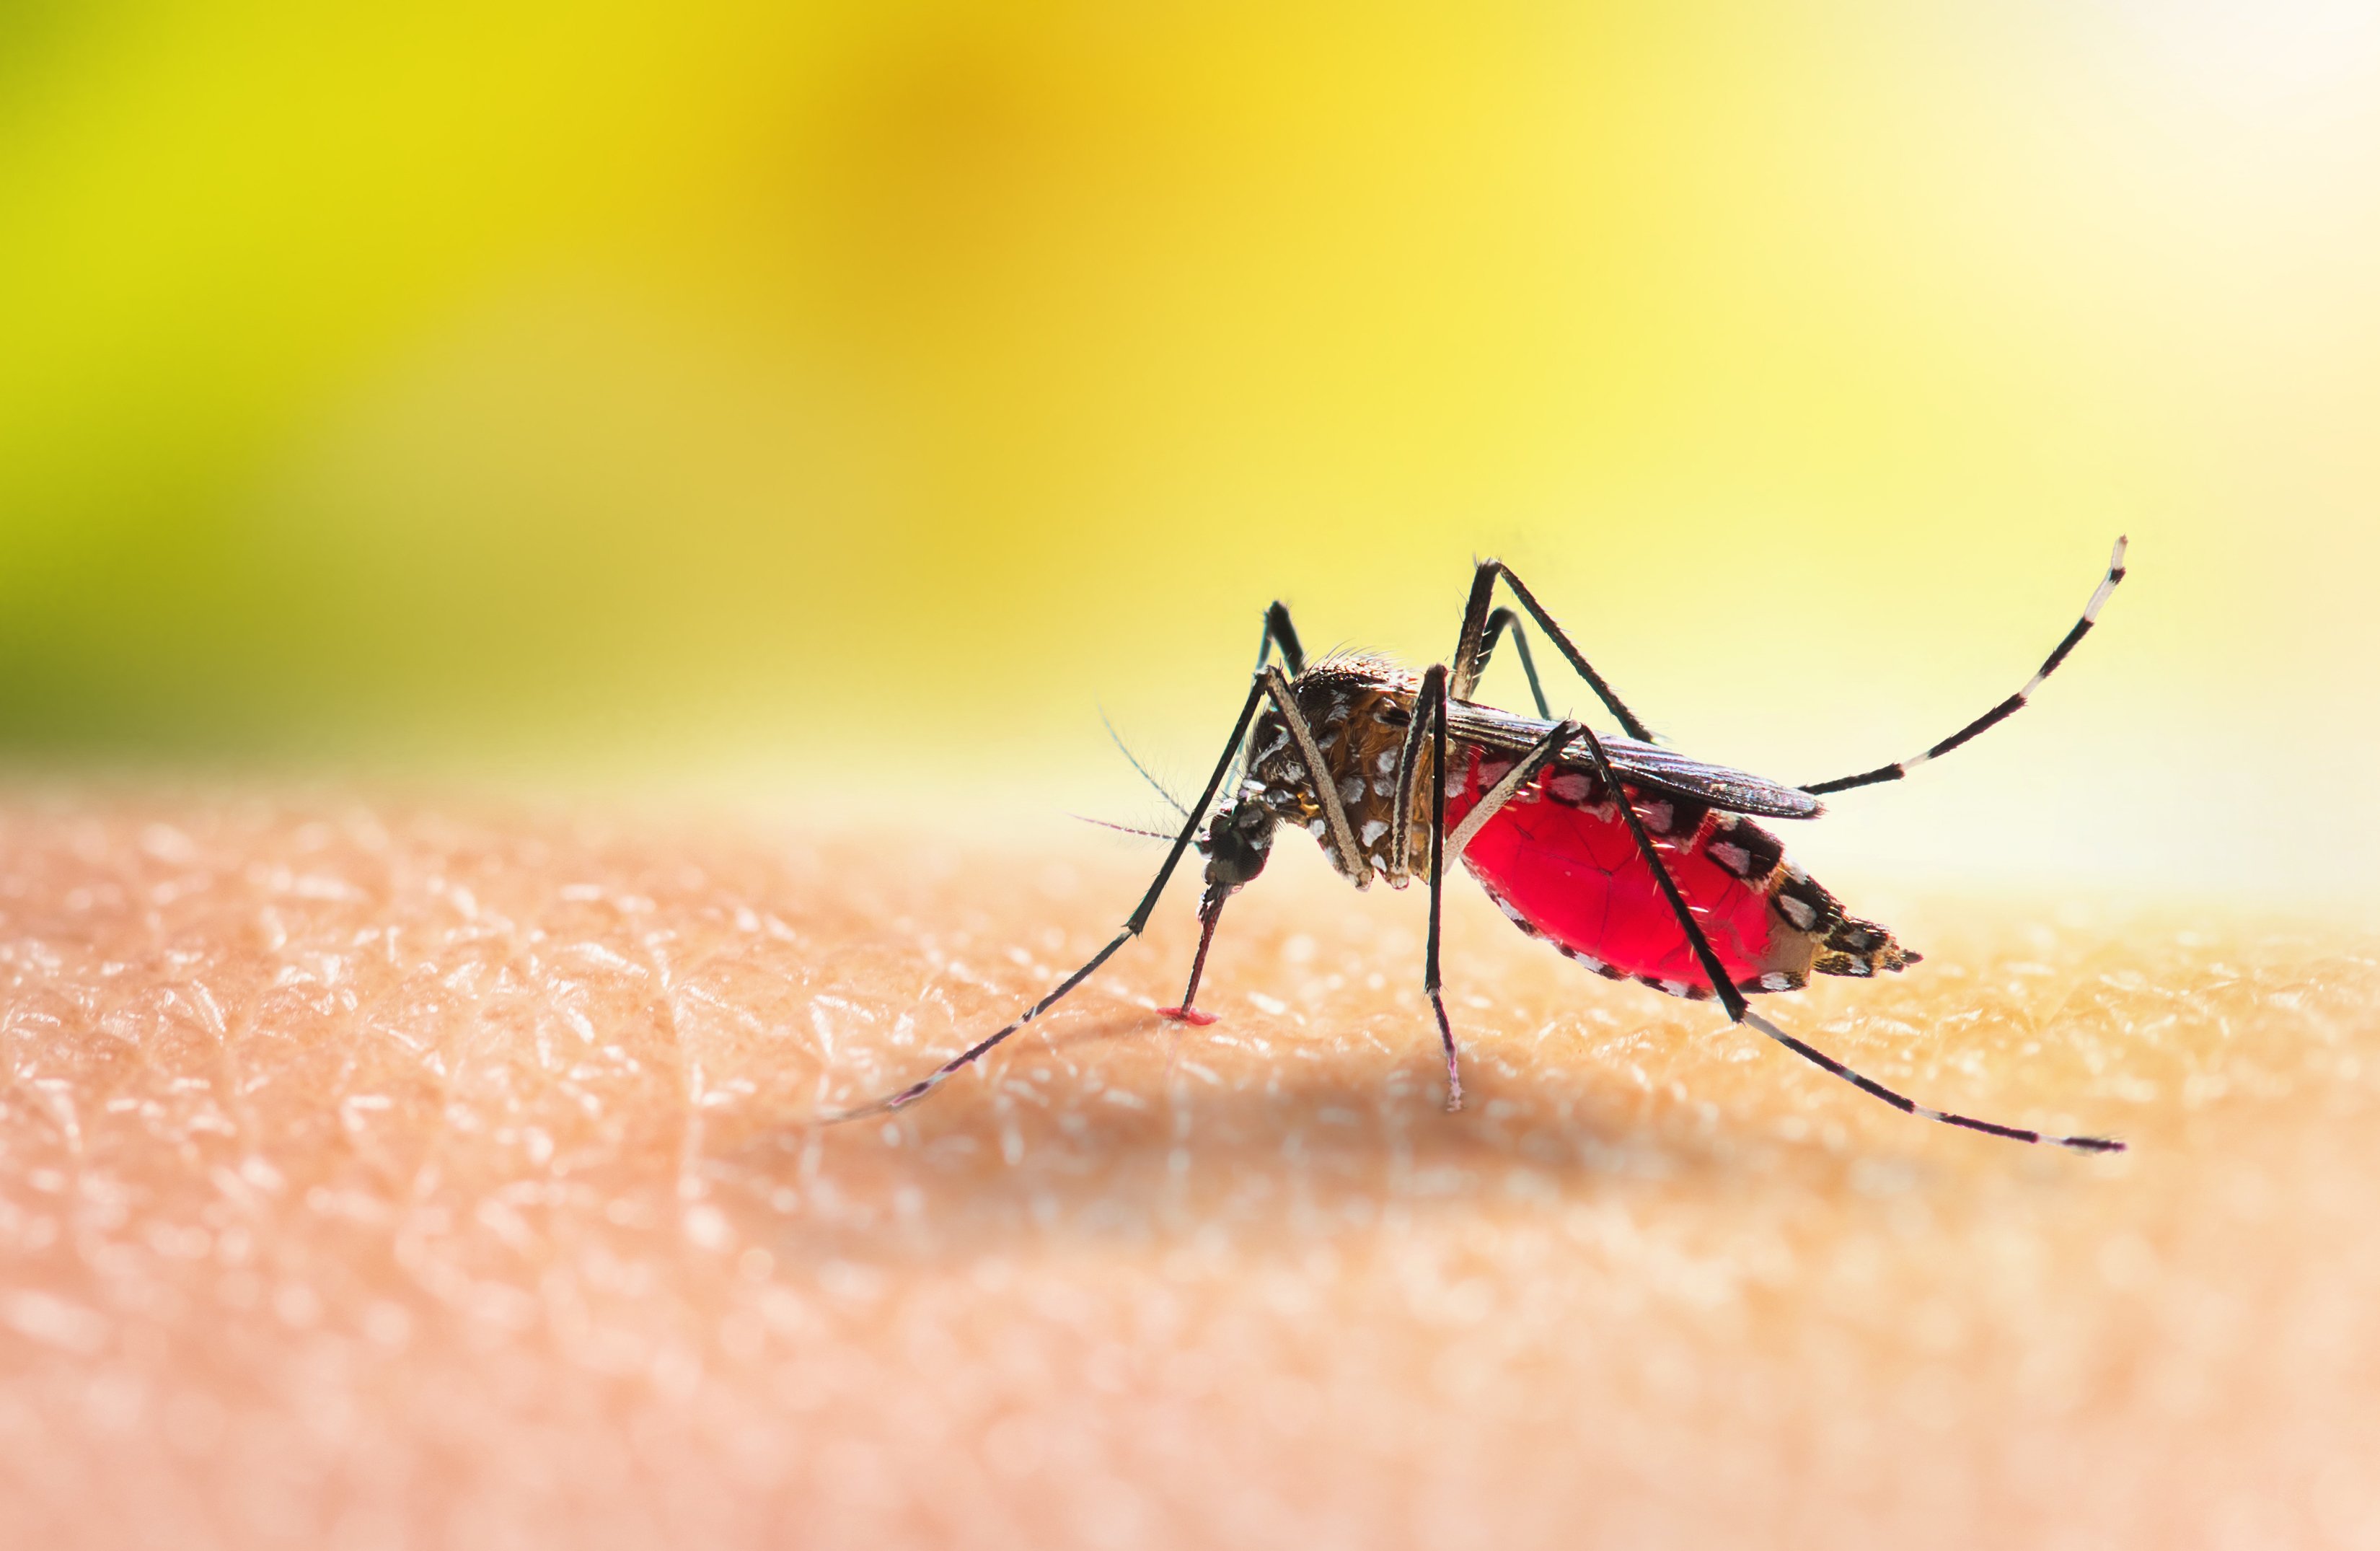 J&J bites back against dengue, linking antiviral to protection from infection in challenge trial